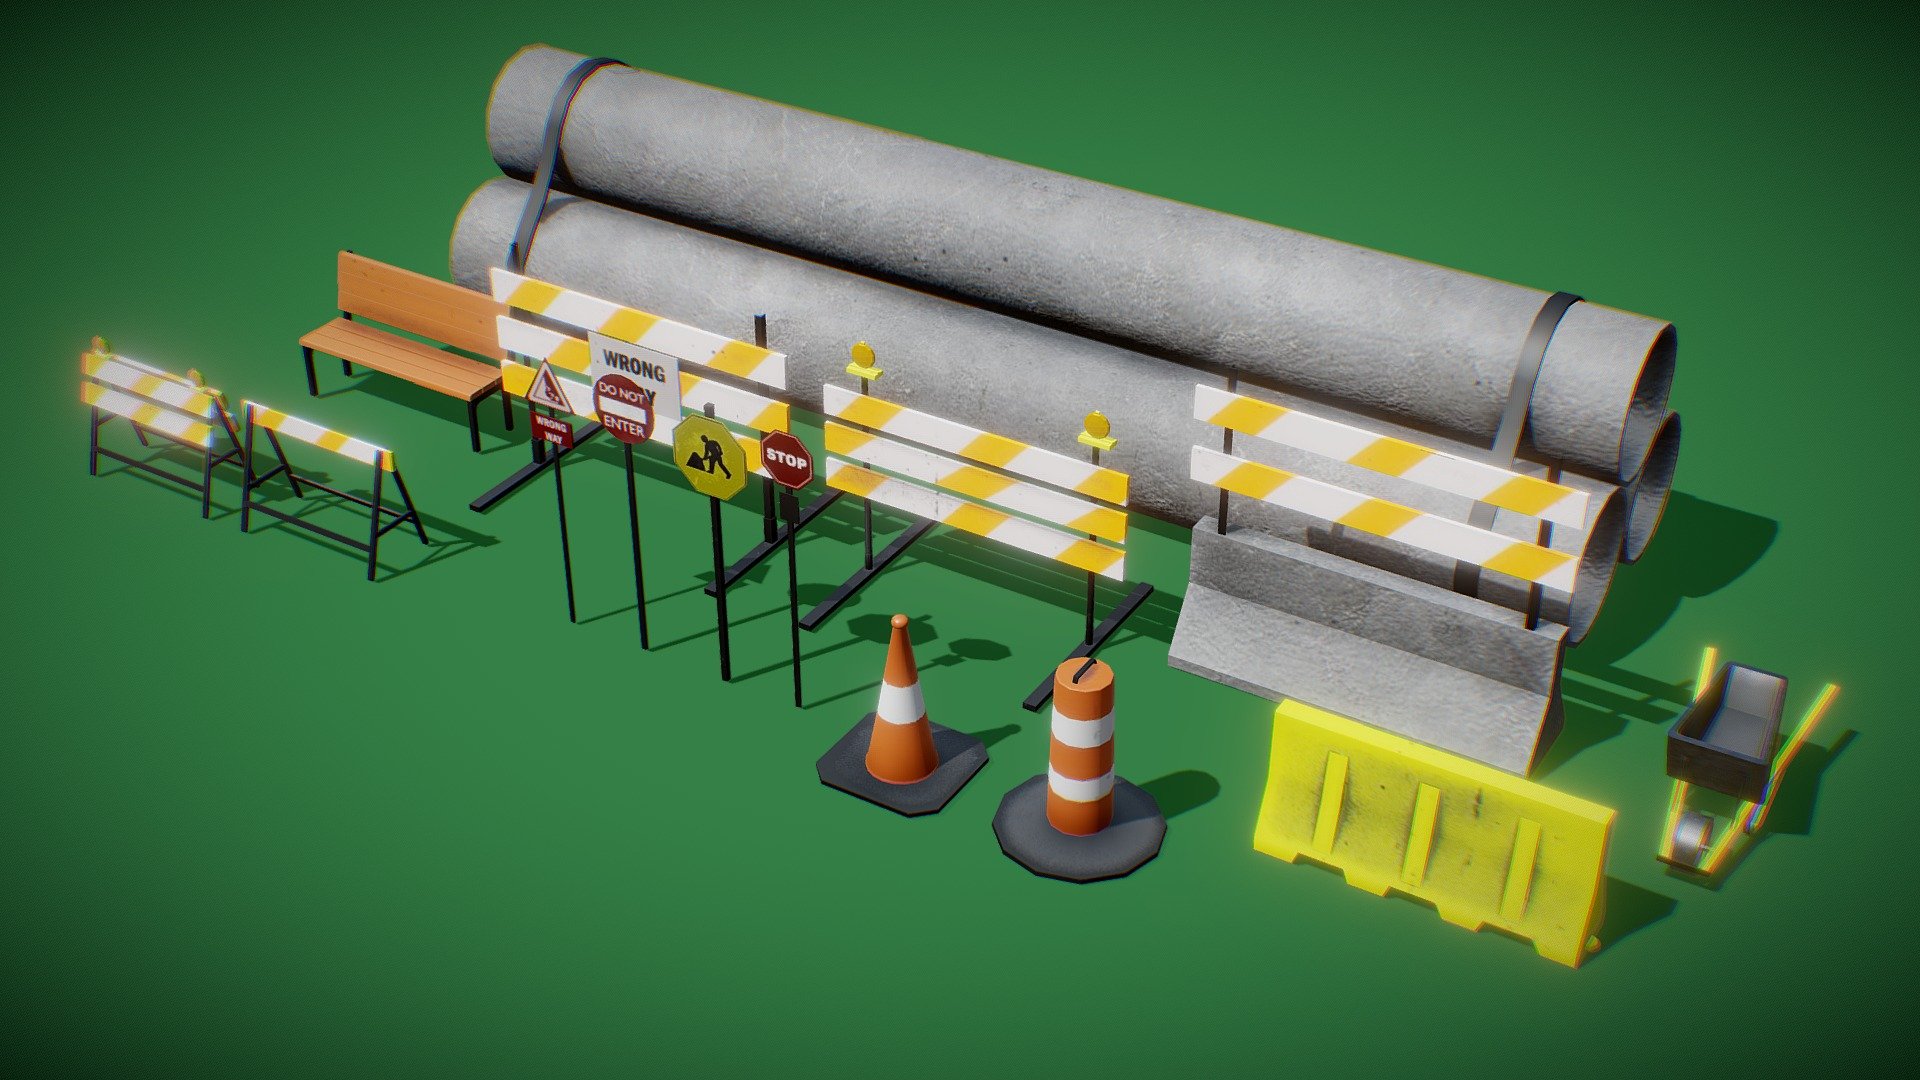 Low poly Road Assets for AR and mobile game environment.
15 road objects include road block, pipe and road sign 3d model